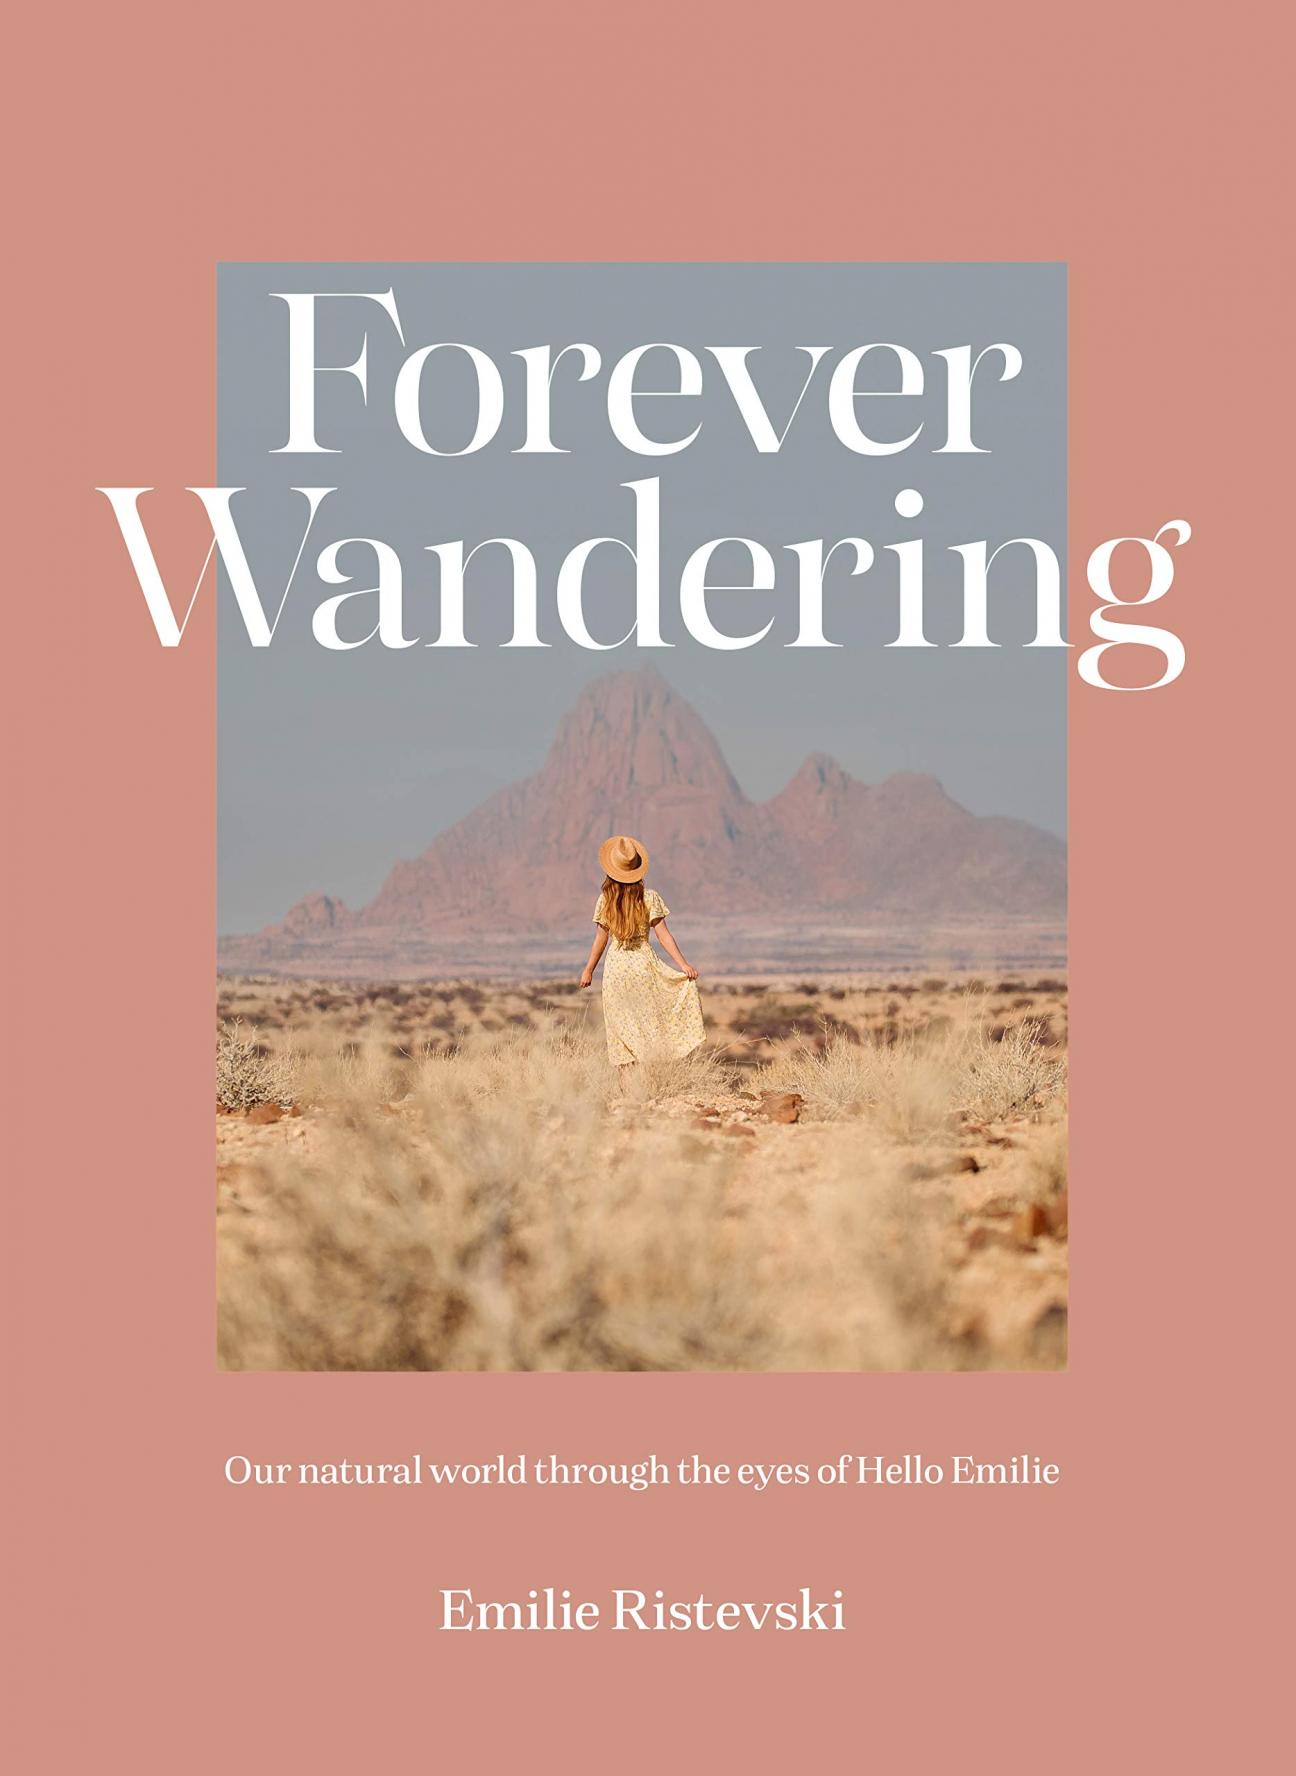 The cover of "Forever Wandering" by Emilie Ristevski, which has a pale pink border surrounding a photograph of a woman in a long dress and straw hat standing in a desert-like area with her back to the camera, looking at a mountain in the far distance.